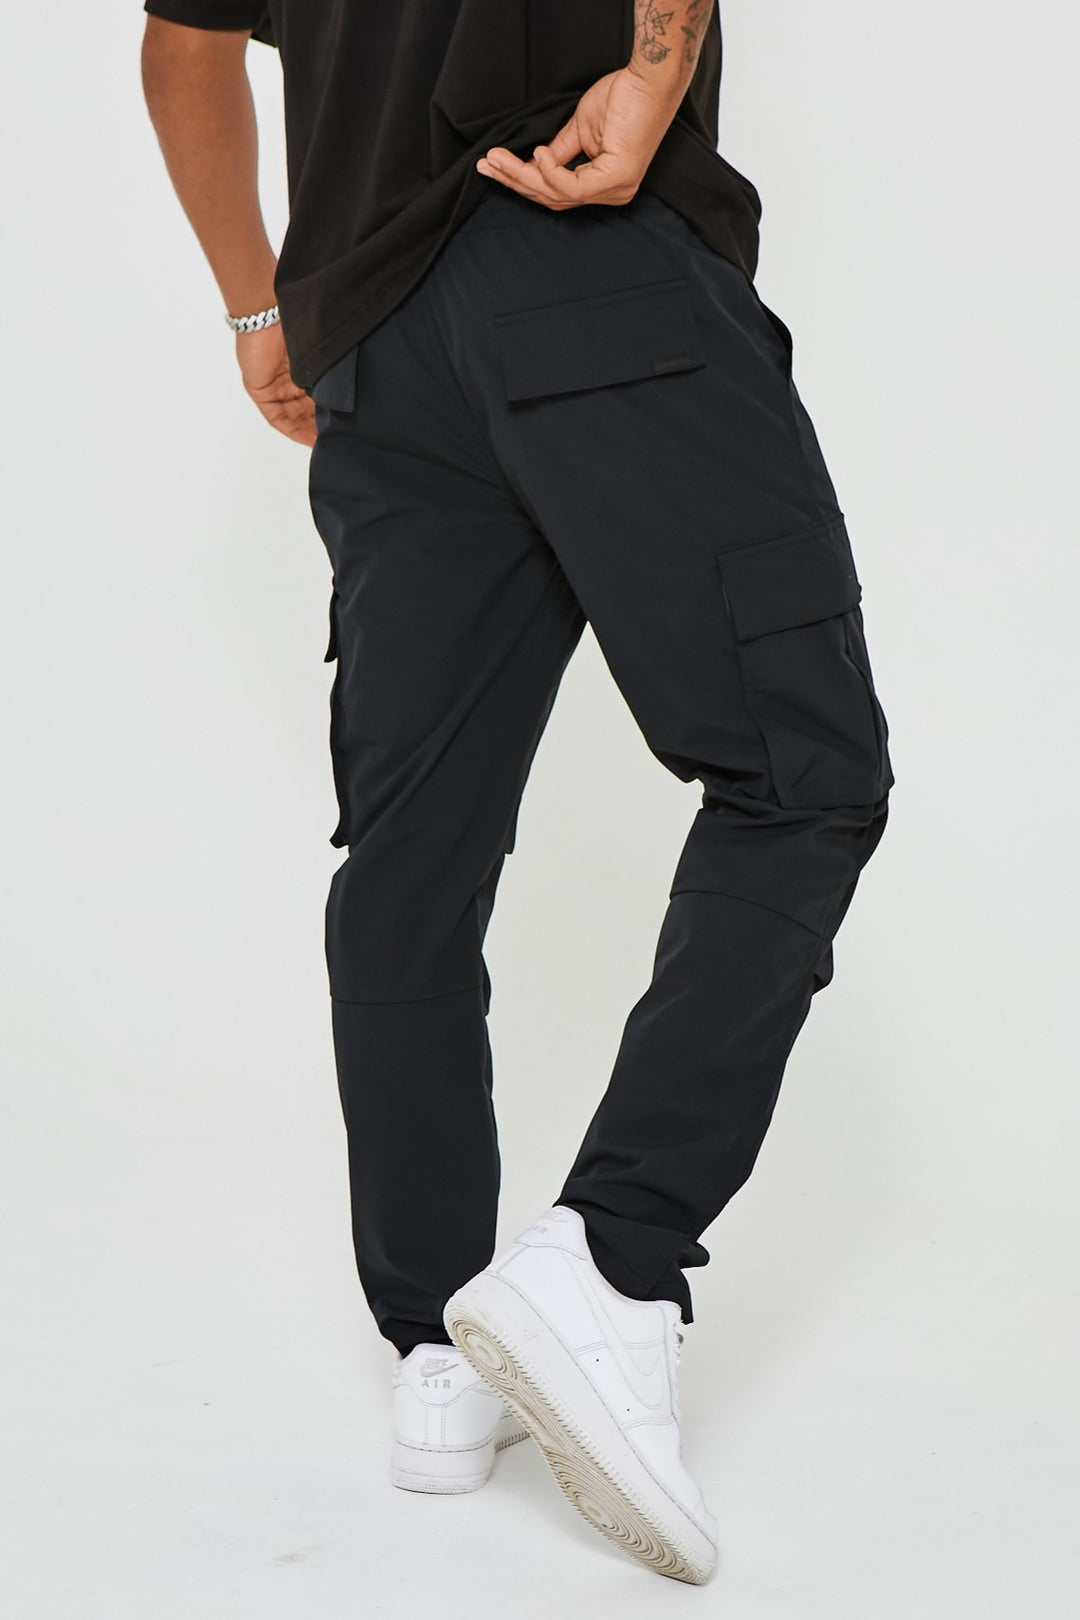 Mens Woven Cargo Pants, Tapered Fit Elasticated Waist, Black – Voi London